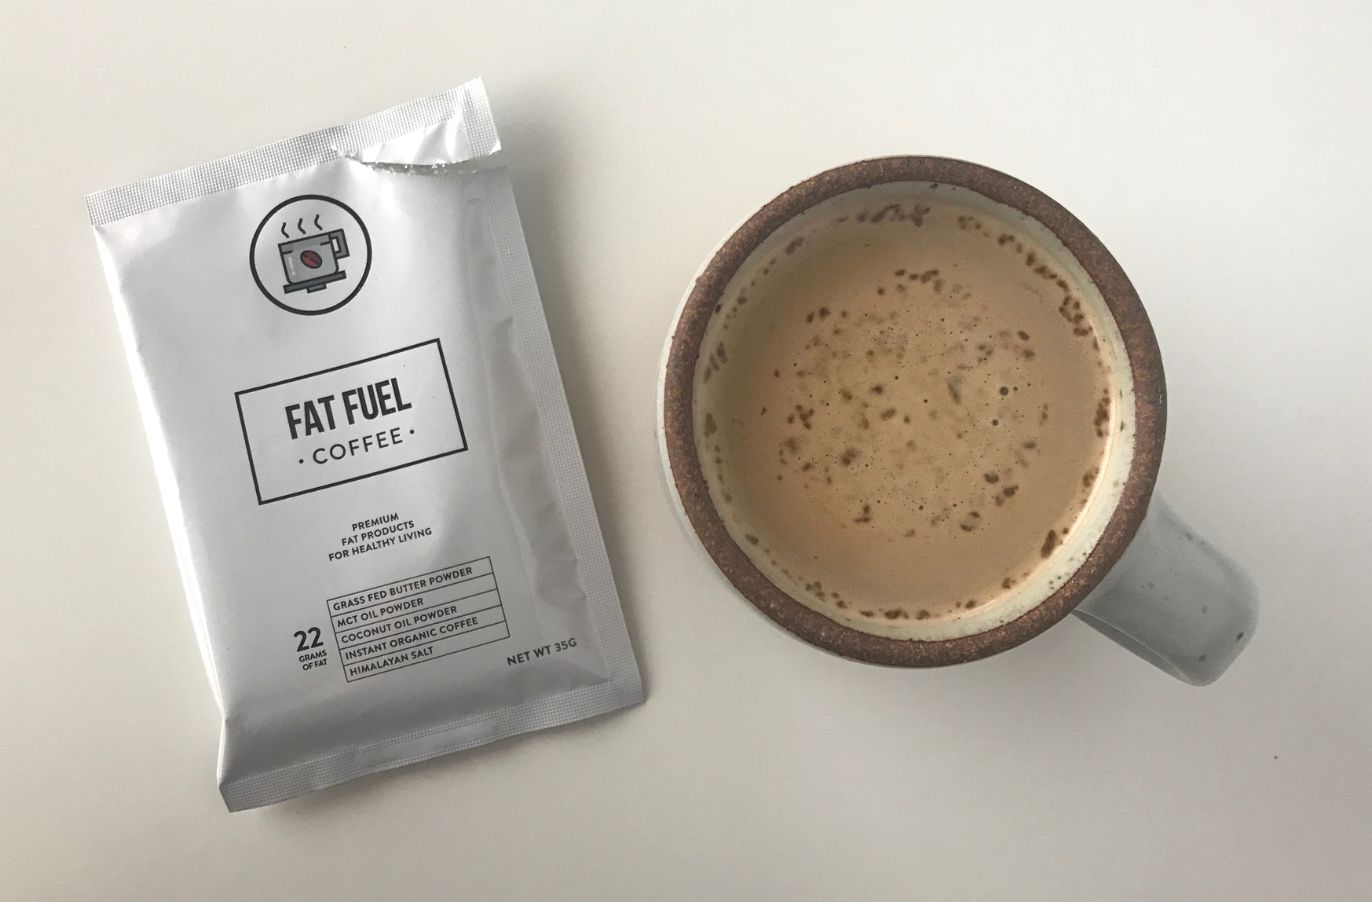 a packet of fat fuel coffee next to a mug of Keto Coffee on a white surface